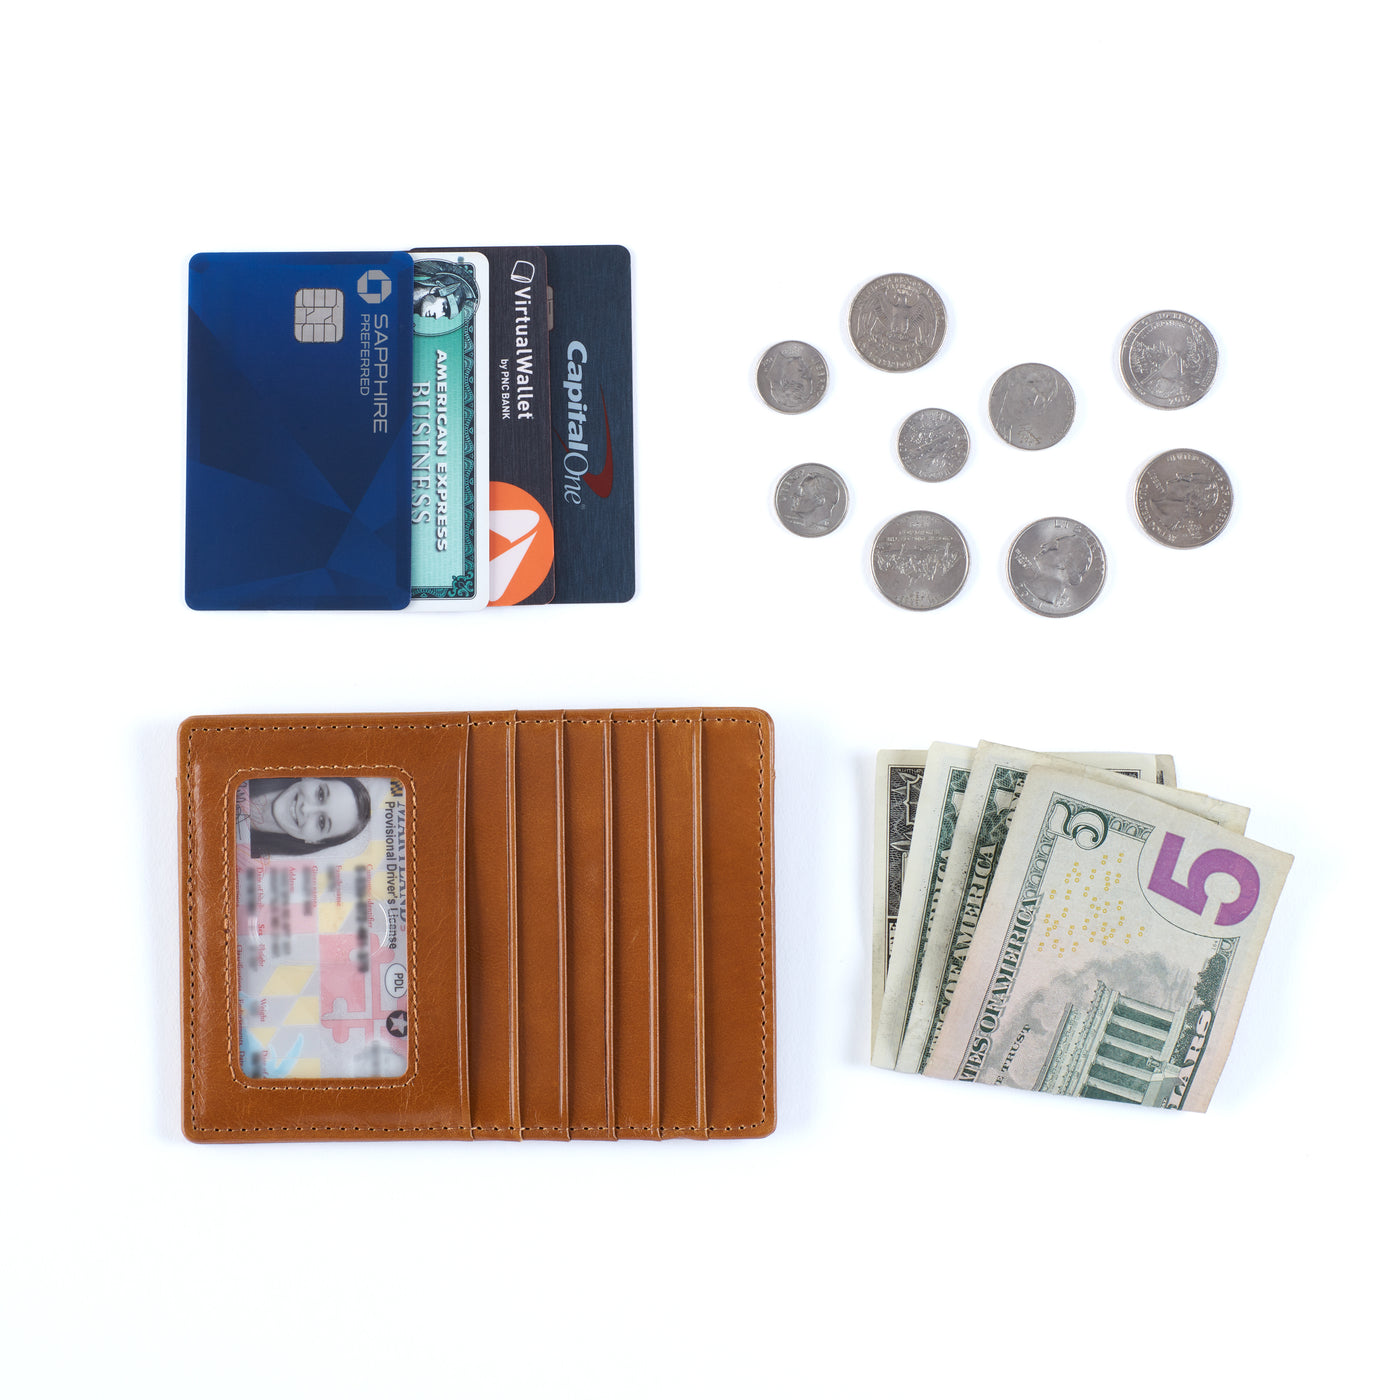 Euro Slide Card Case in Polished Leather - Garden Green